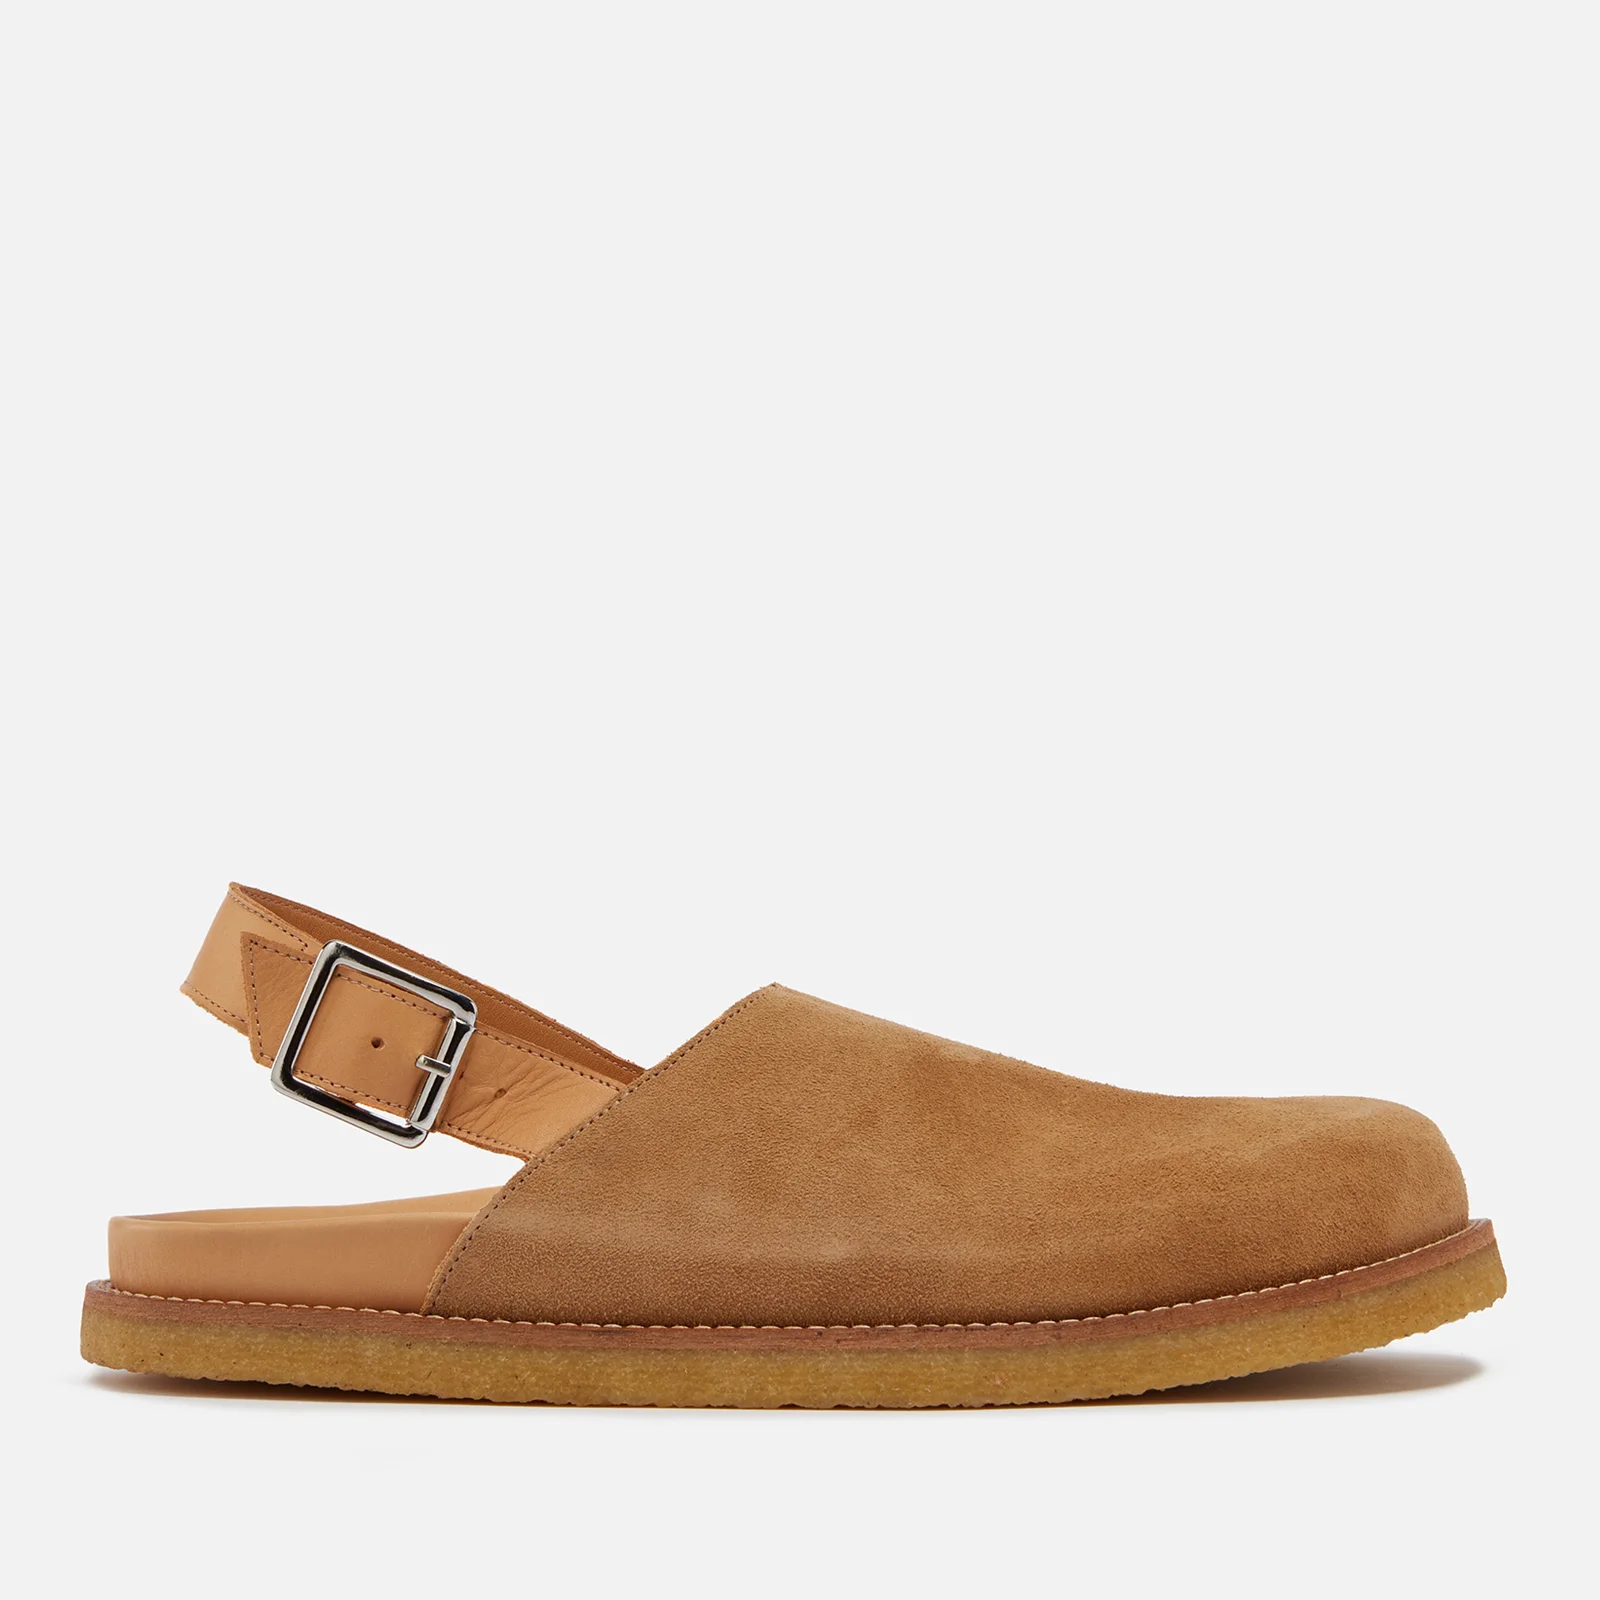 Vinny’s Men’s Suede and Leather Mules Image 1